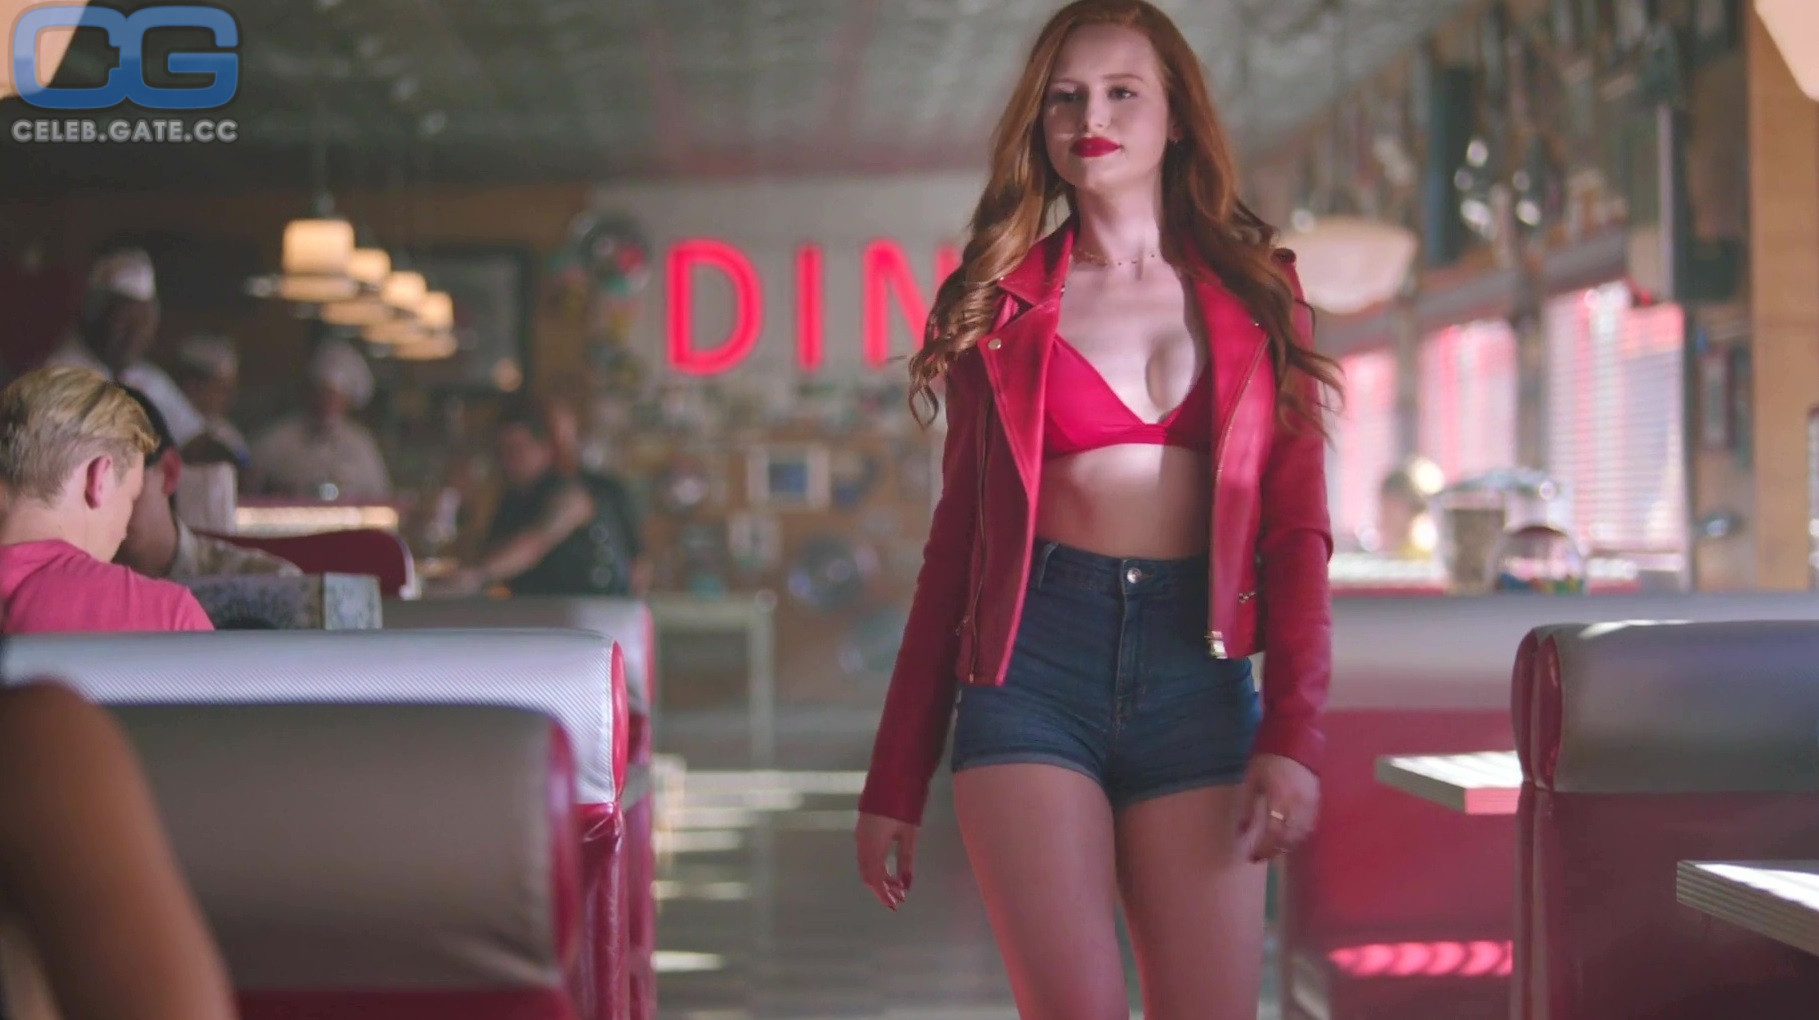 Madelaine petsch fappening